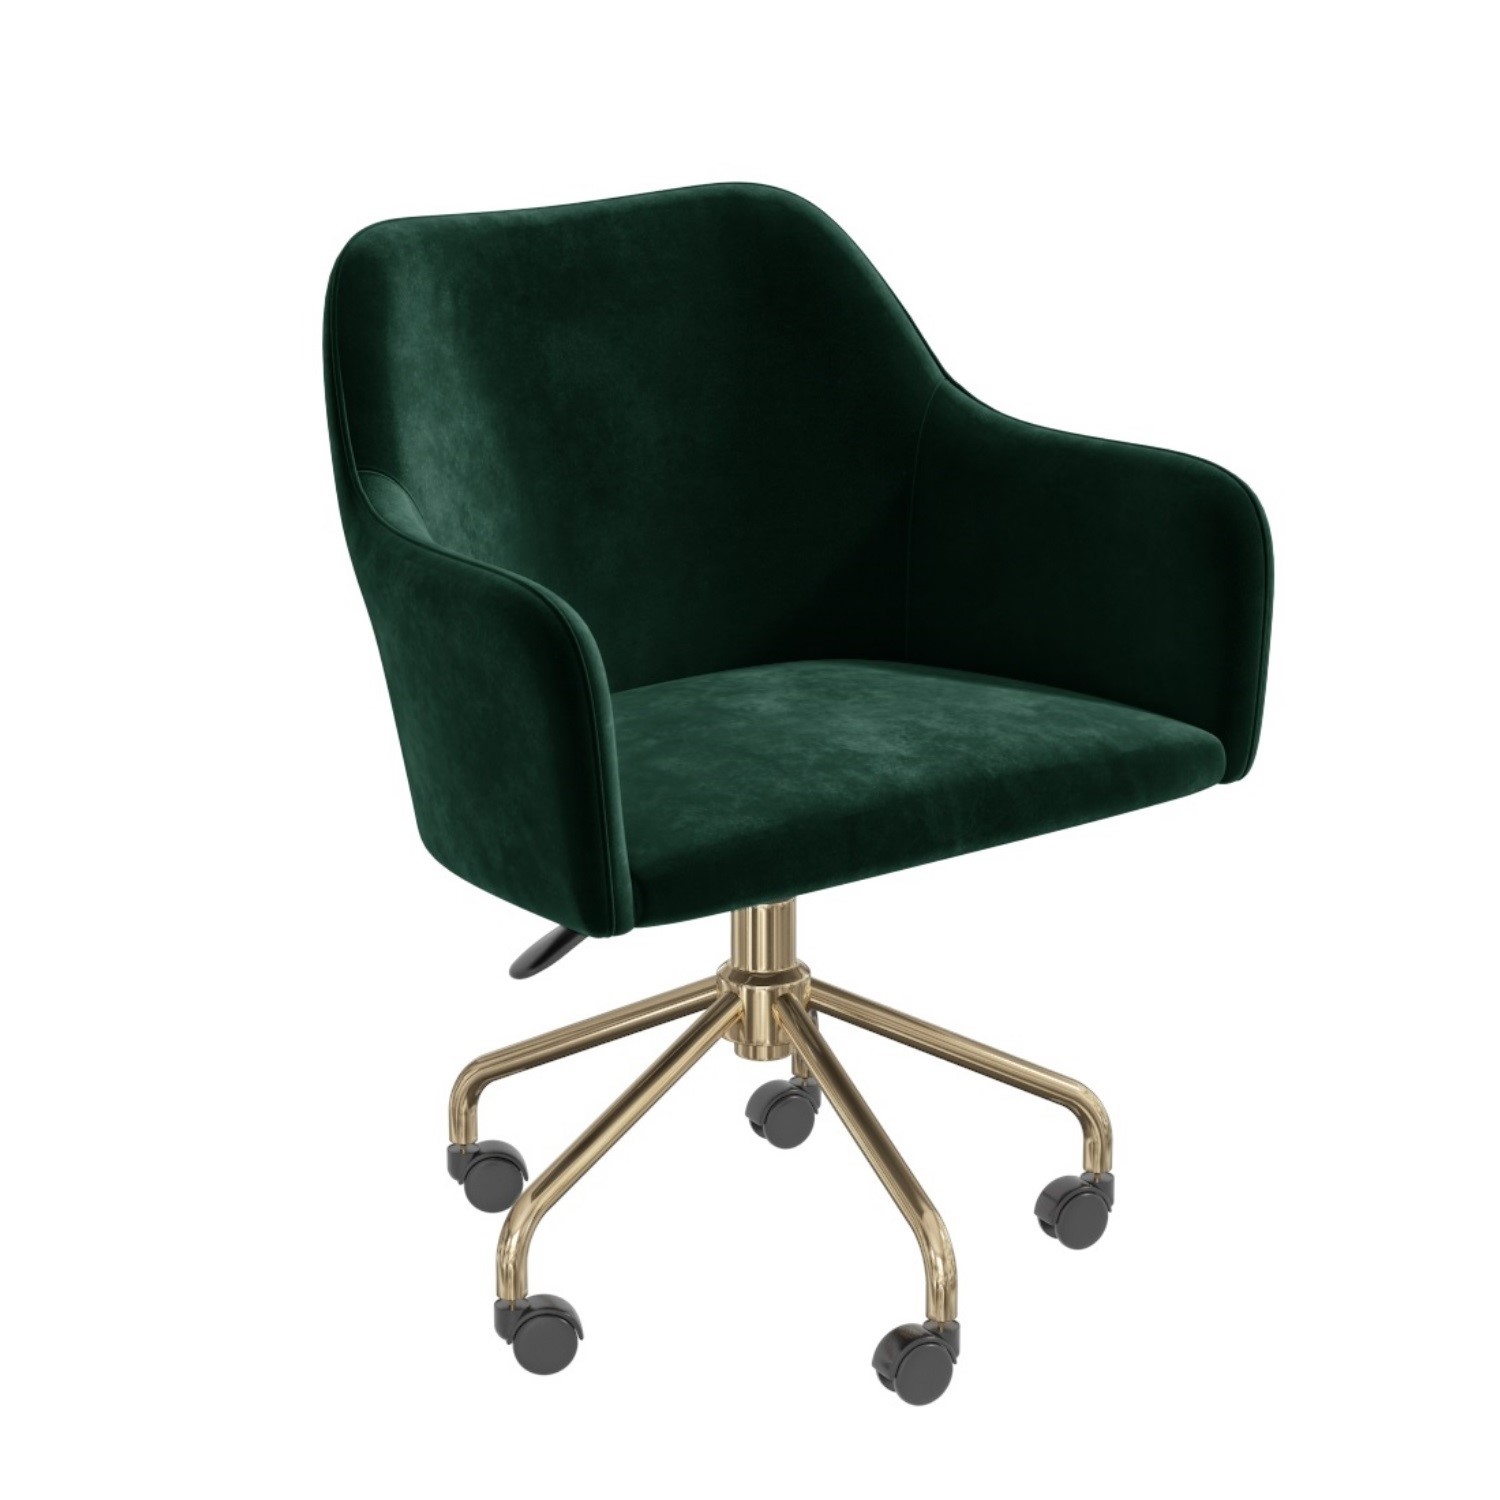 Photo of Green velvet office chair with arms - marley